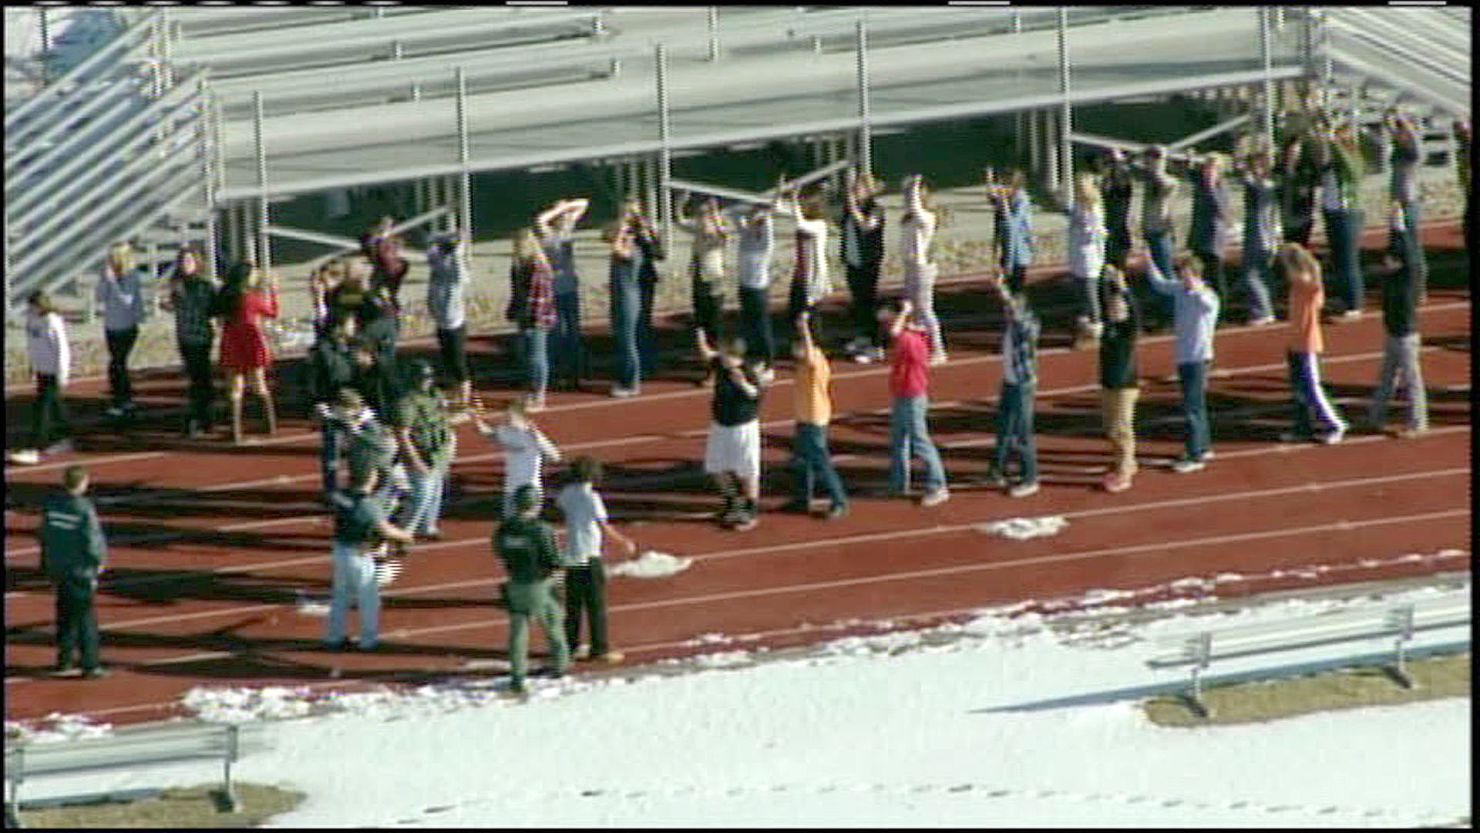 Persons evacuated from Arapahoe High School in Centenial, Colorado, walk on the school's track after a shooting at the school.